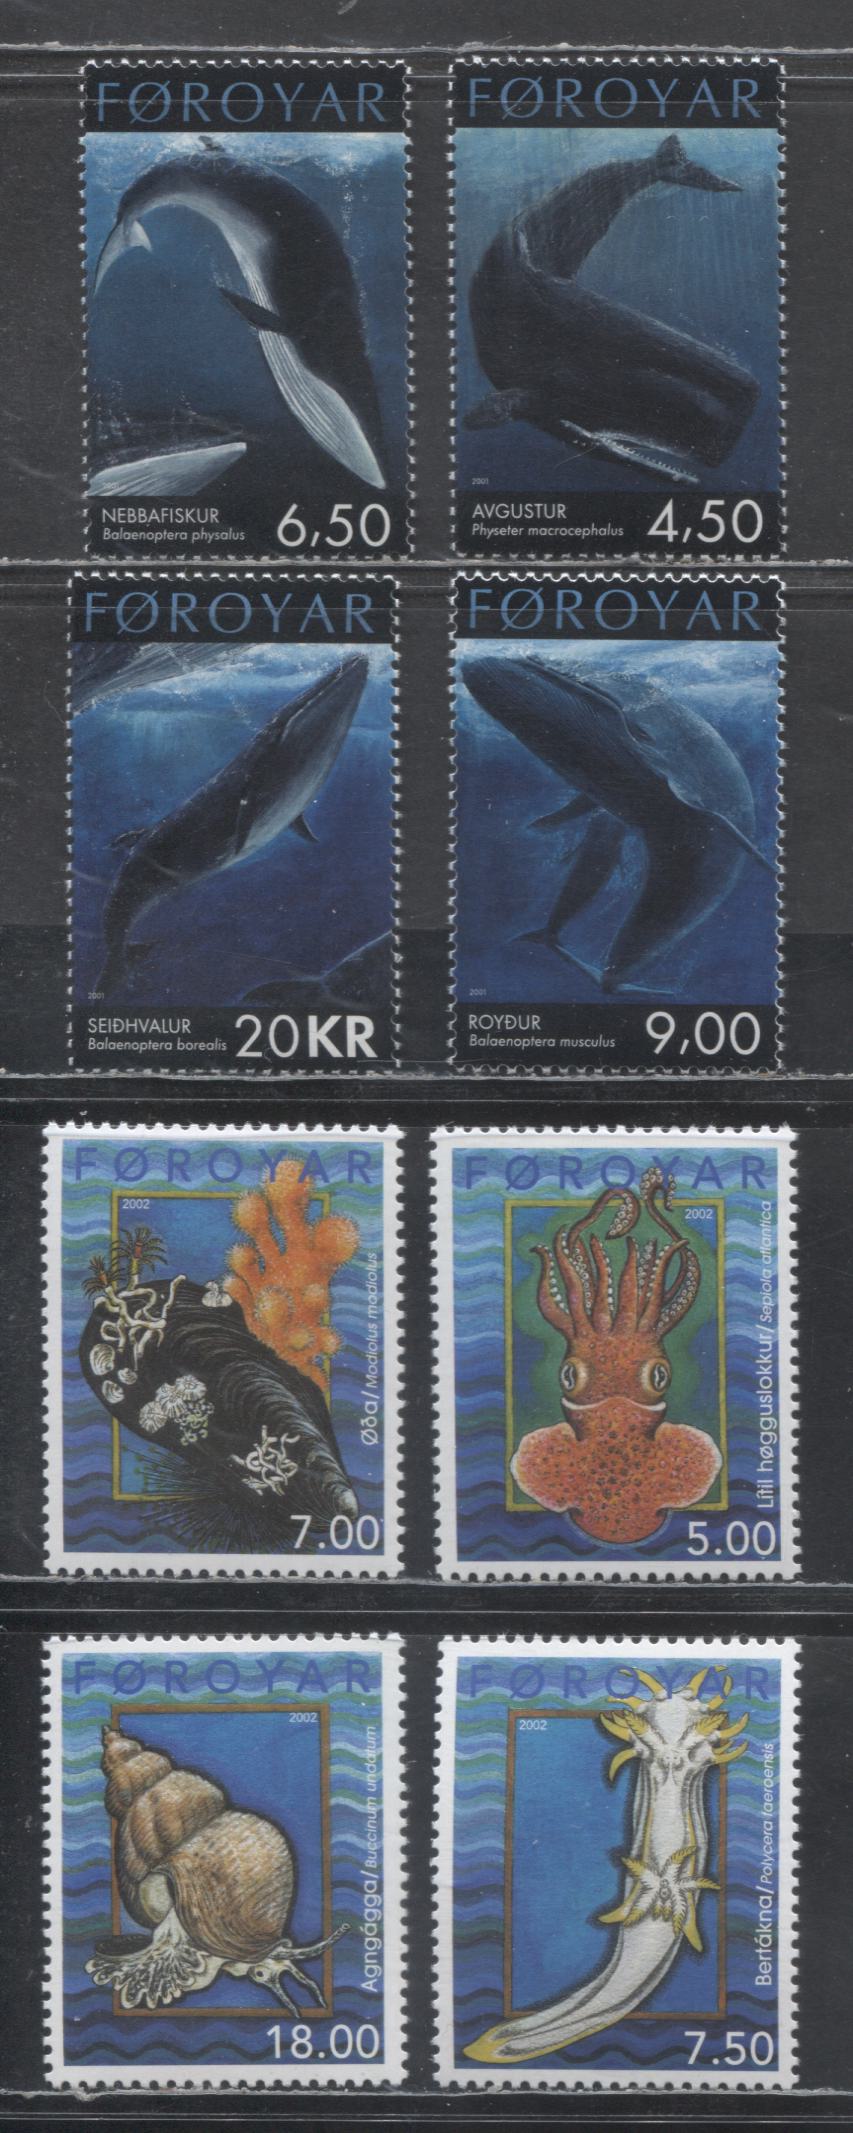 Lot 205 Faroe Islands SC#403-406, 409-412  2001 Whales - 2002 Mollusks, 8 VFNH Singles, Click on Listing to See ALL Pictures, 2017 Scott Cat. $25.4 USD